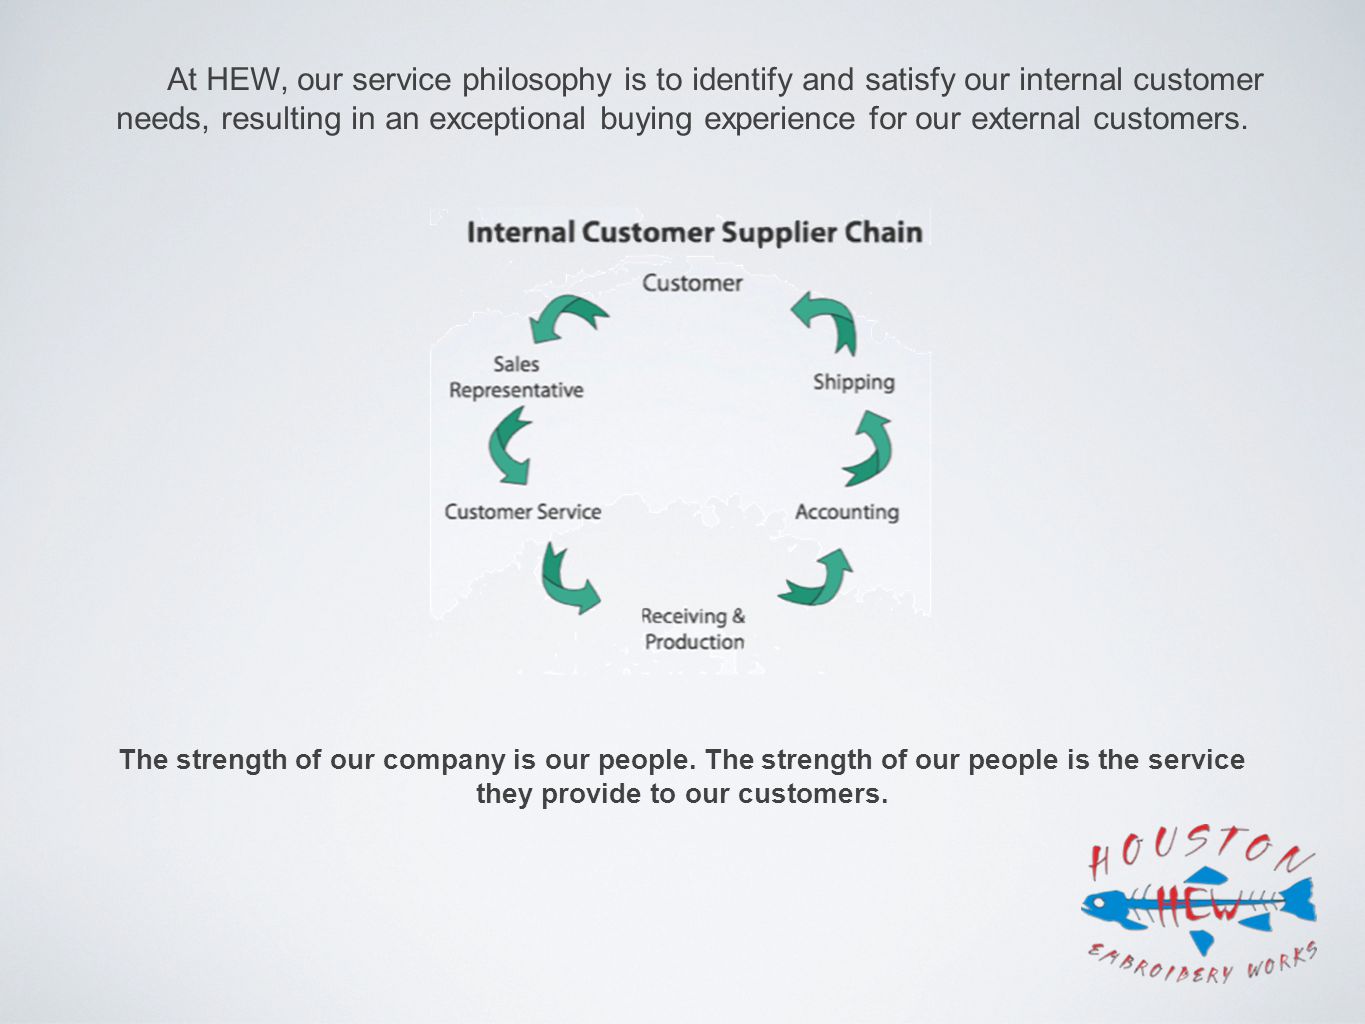 The strength of our company is our people.